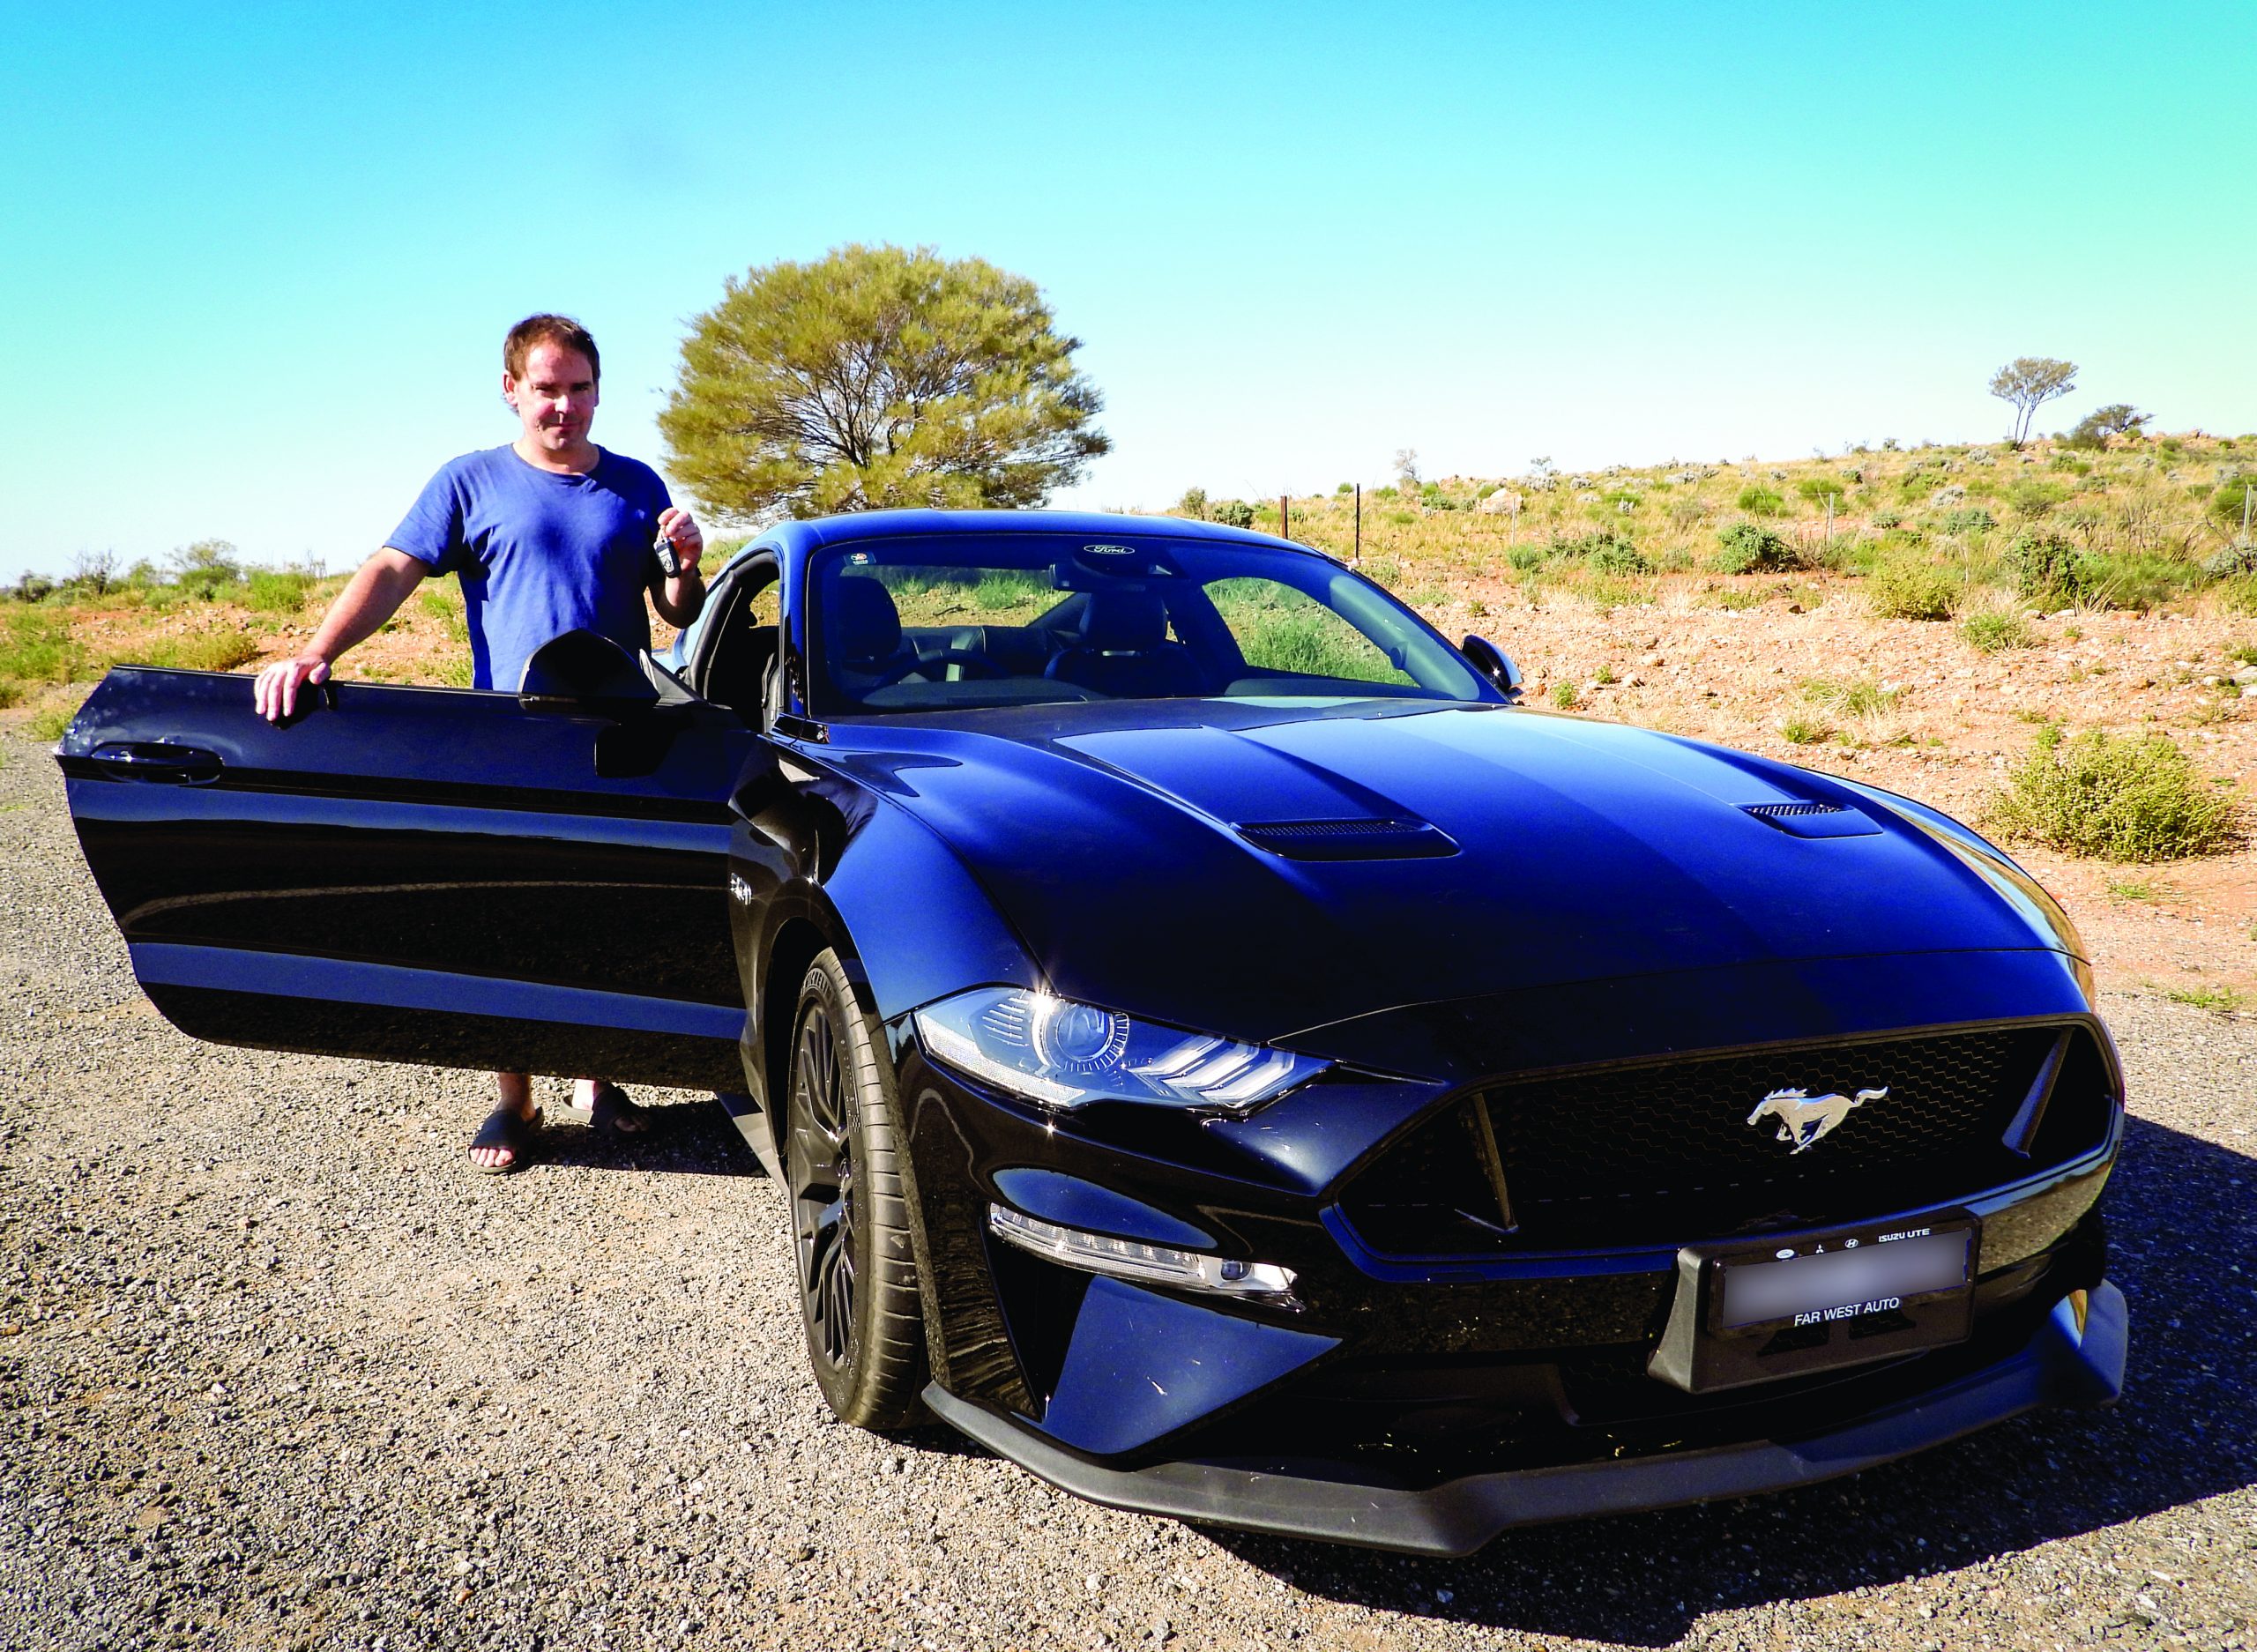 Chris Schmidt with his new Ford Mustang GT worth $73K. PICUTRE: ANDREW LODIONG